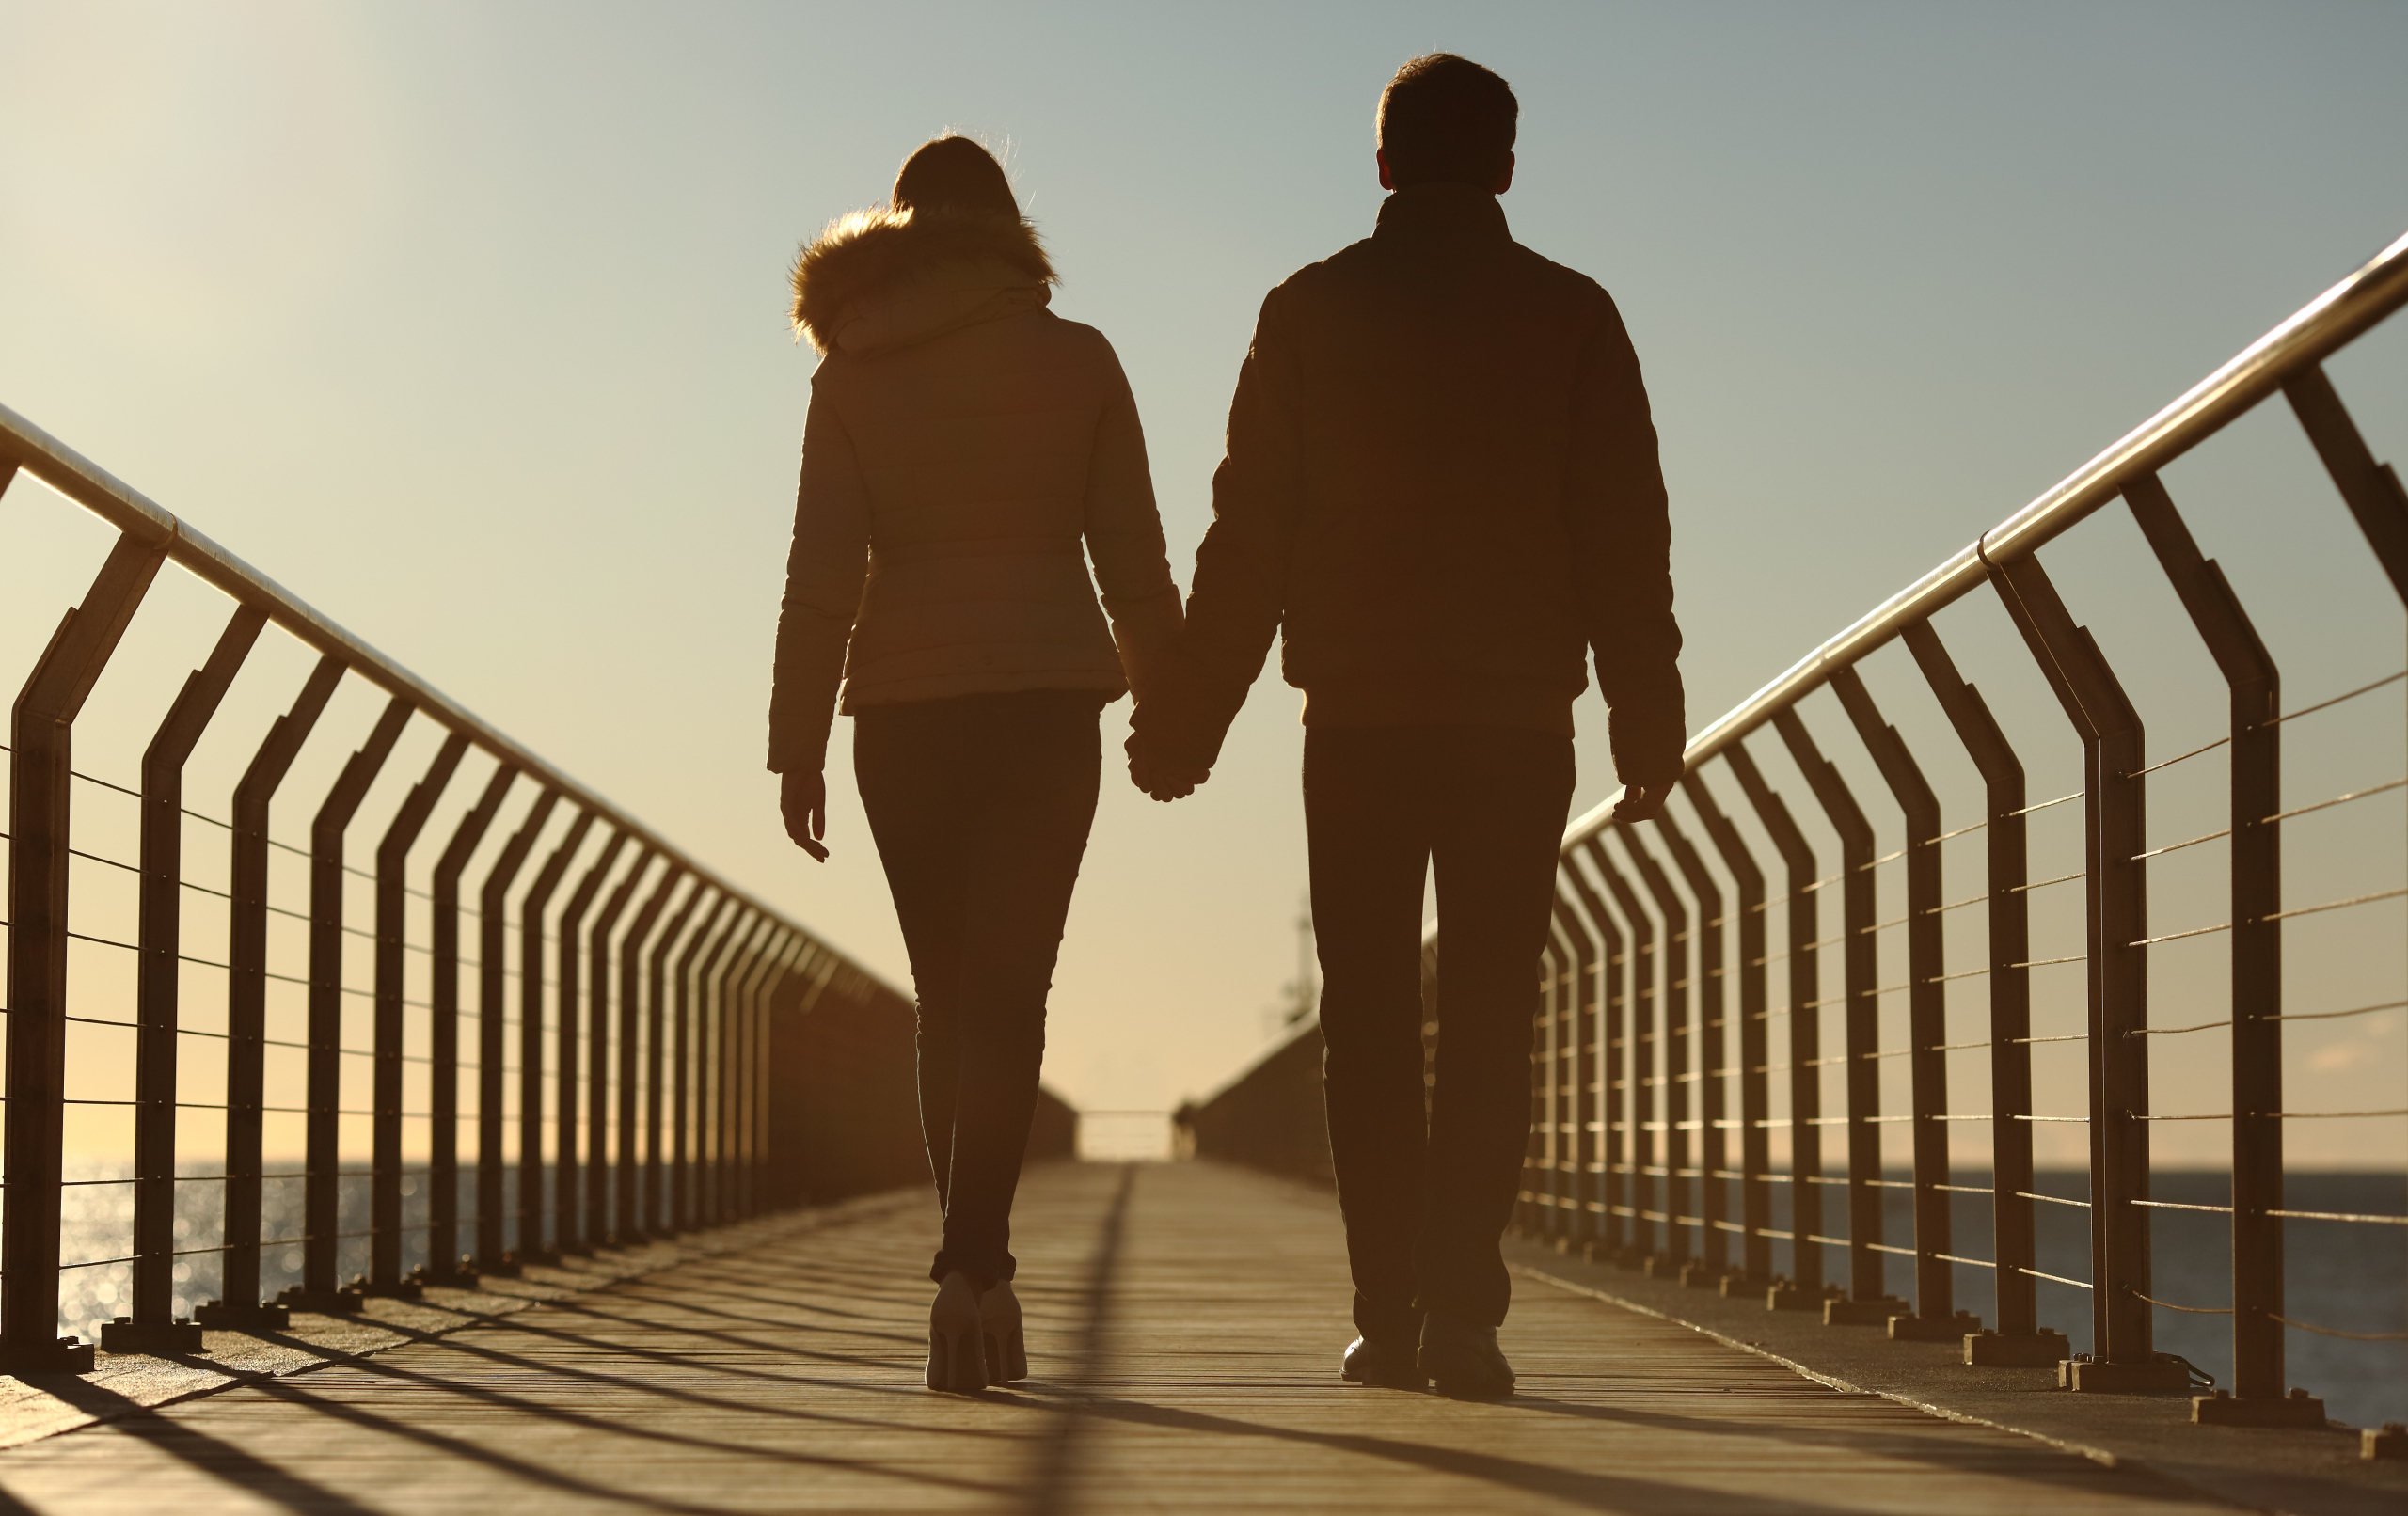 financial planning for couples